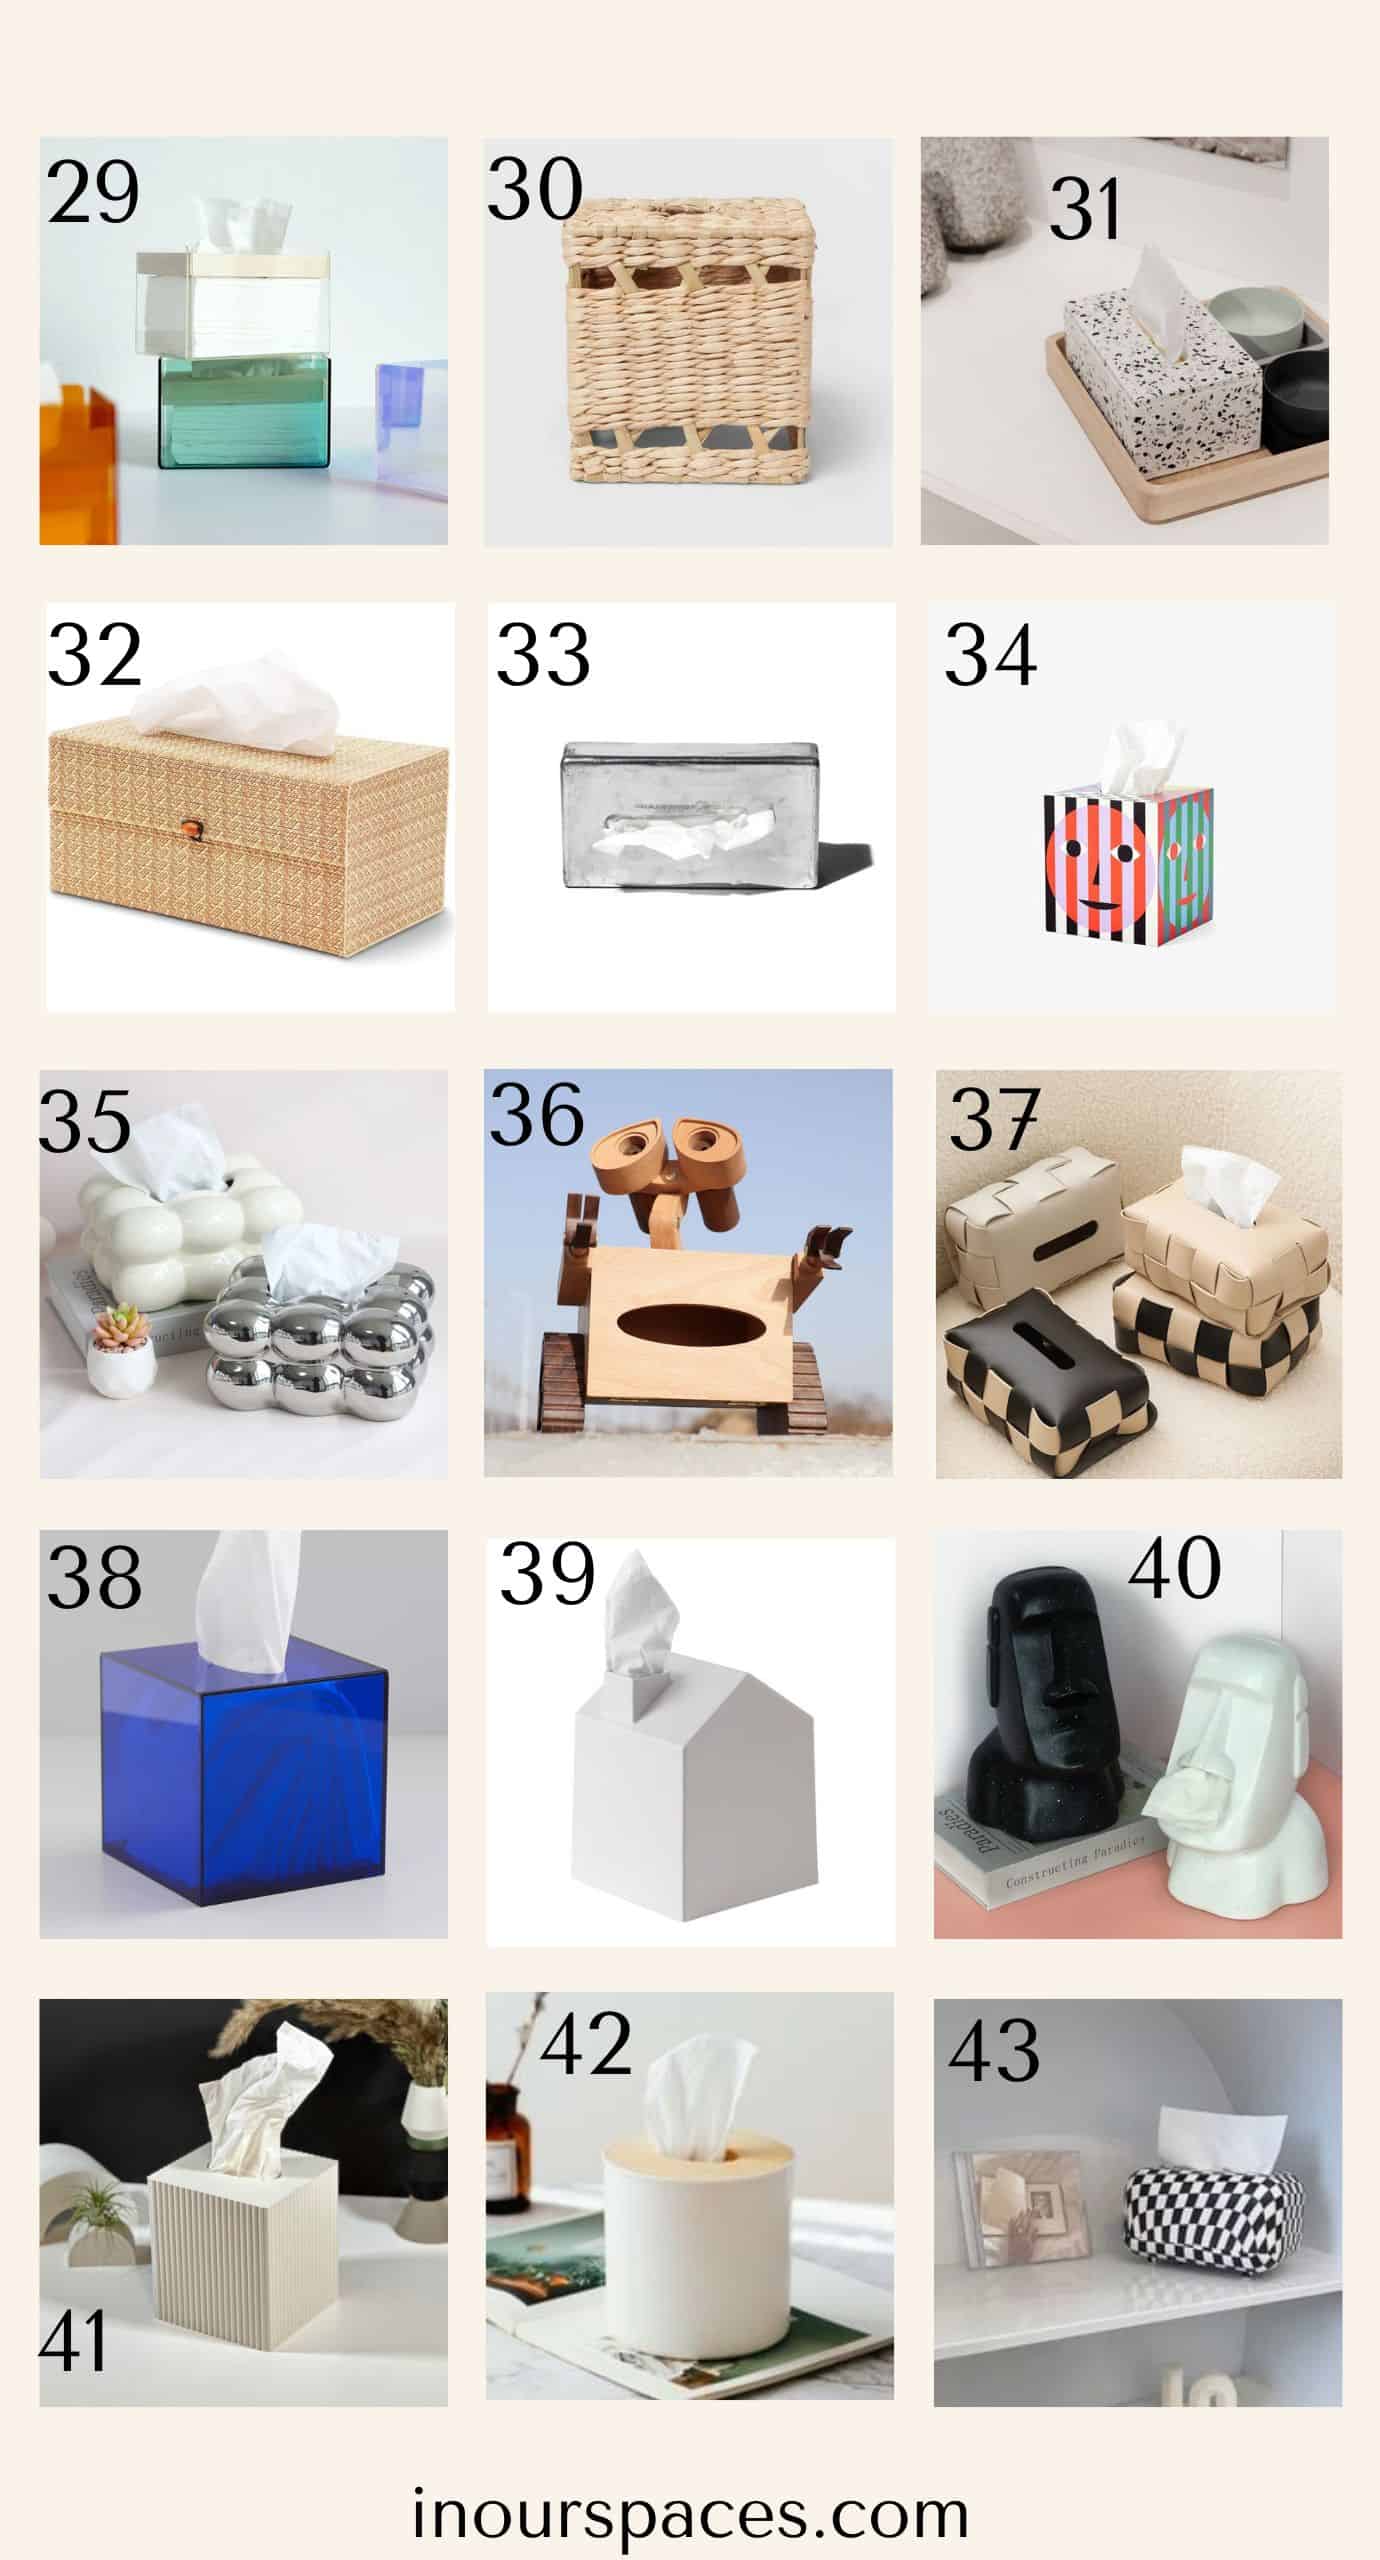 image of 15 tissue box cover modern